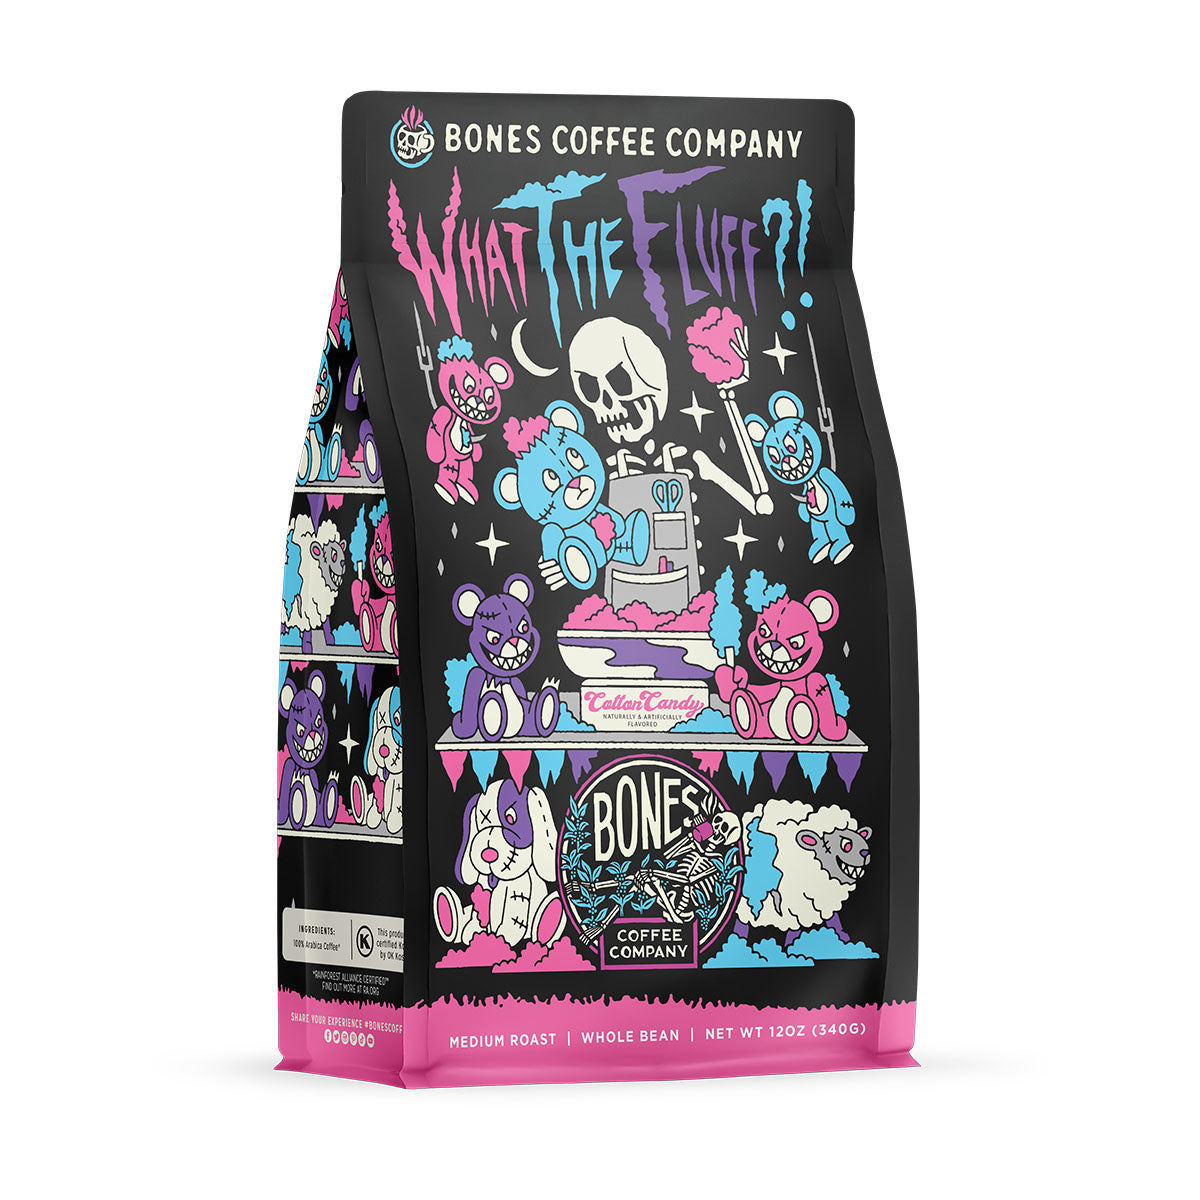 The front of a 12 ounce bag of Bones Coffee Company What the Fluff coffee. Its flavor is berry cotton candy, and it has a skeleton angrily stuffing teddy bears with cotton candy on the art.